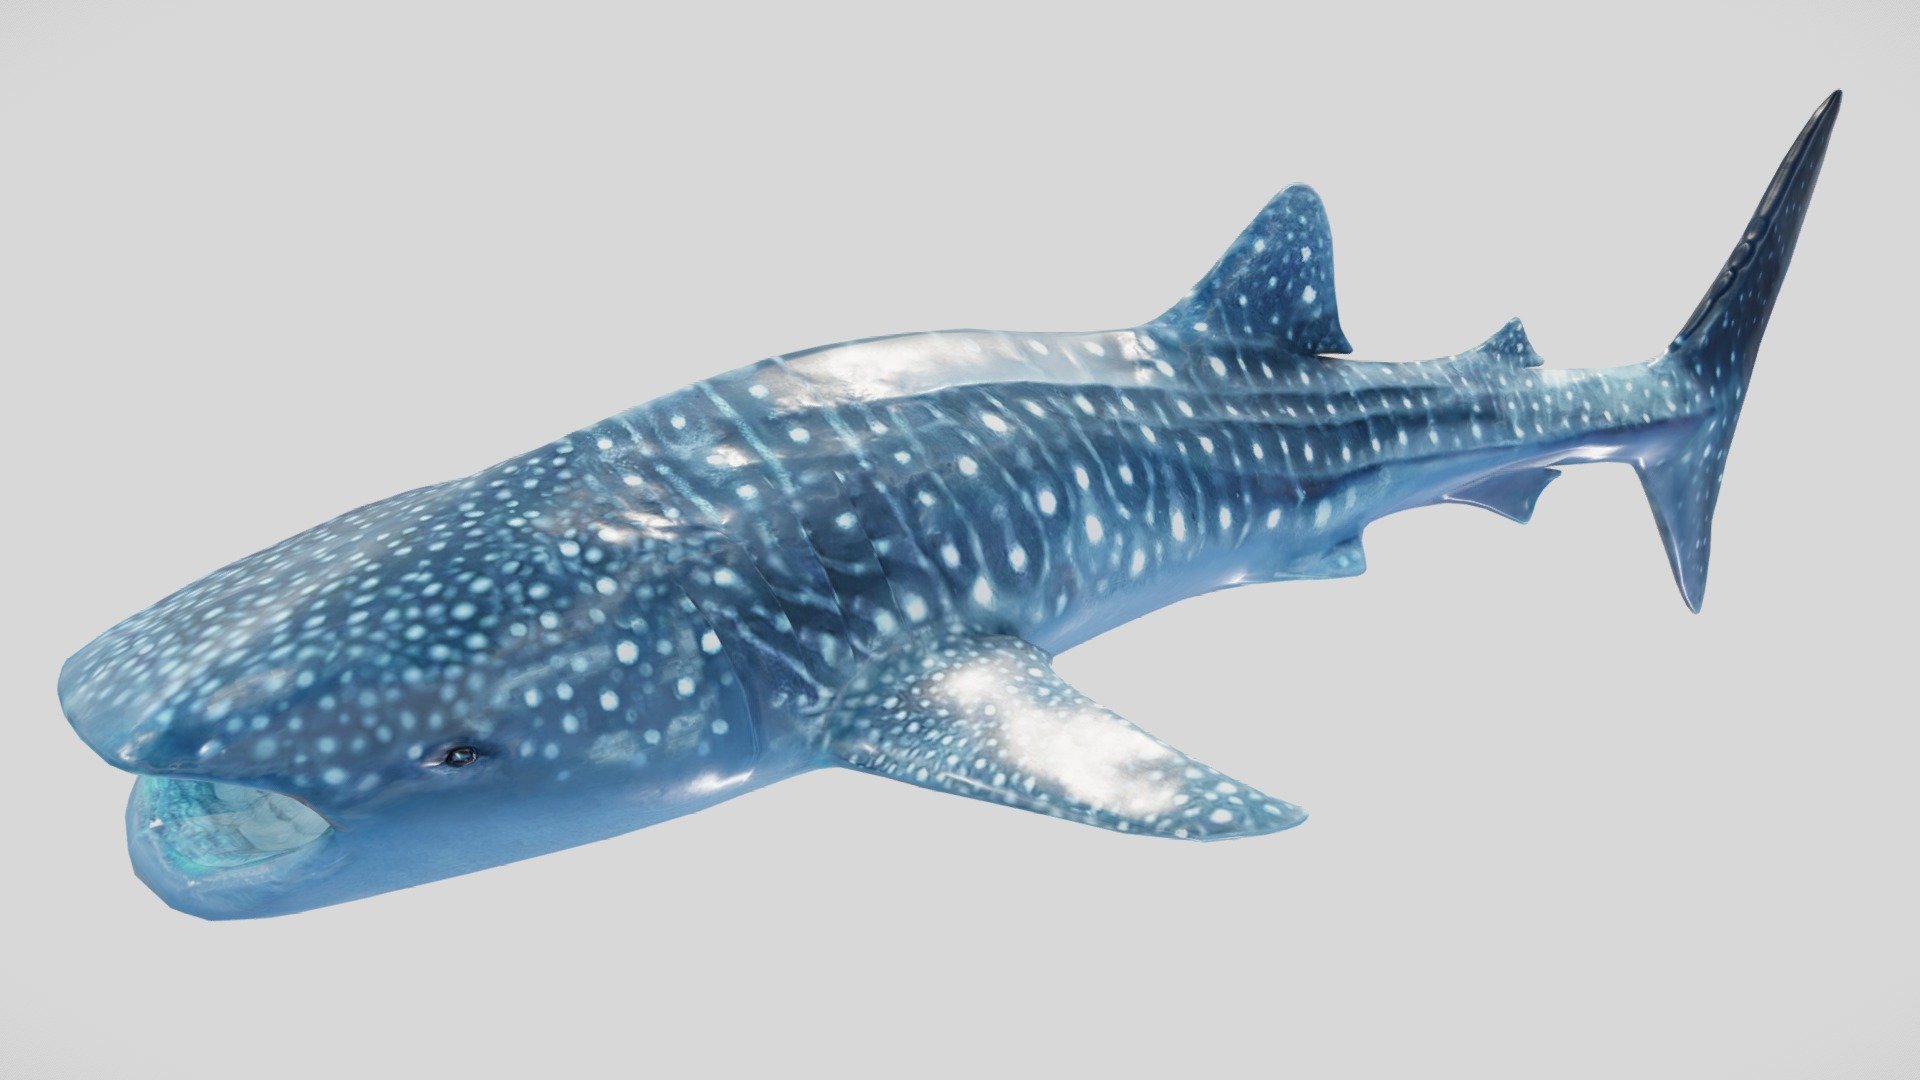 This Whaleshark comes animated, with a 4096x2048 diffuse and Normal Map.
It also comes with an Unreal Engine project, complete with an animated spline system 3d model